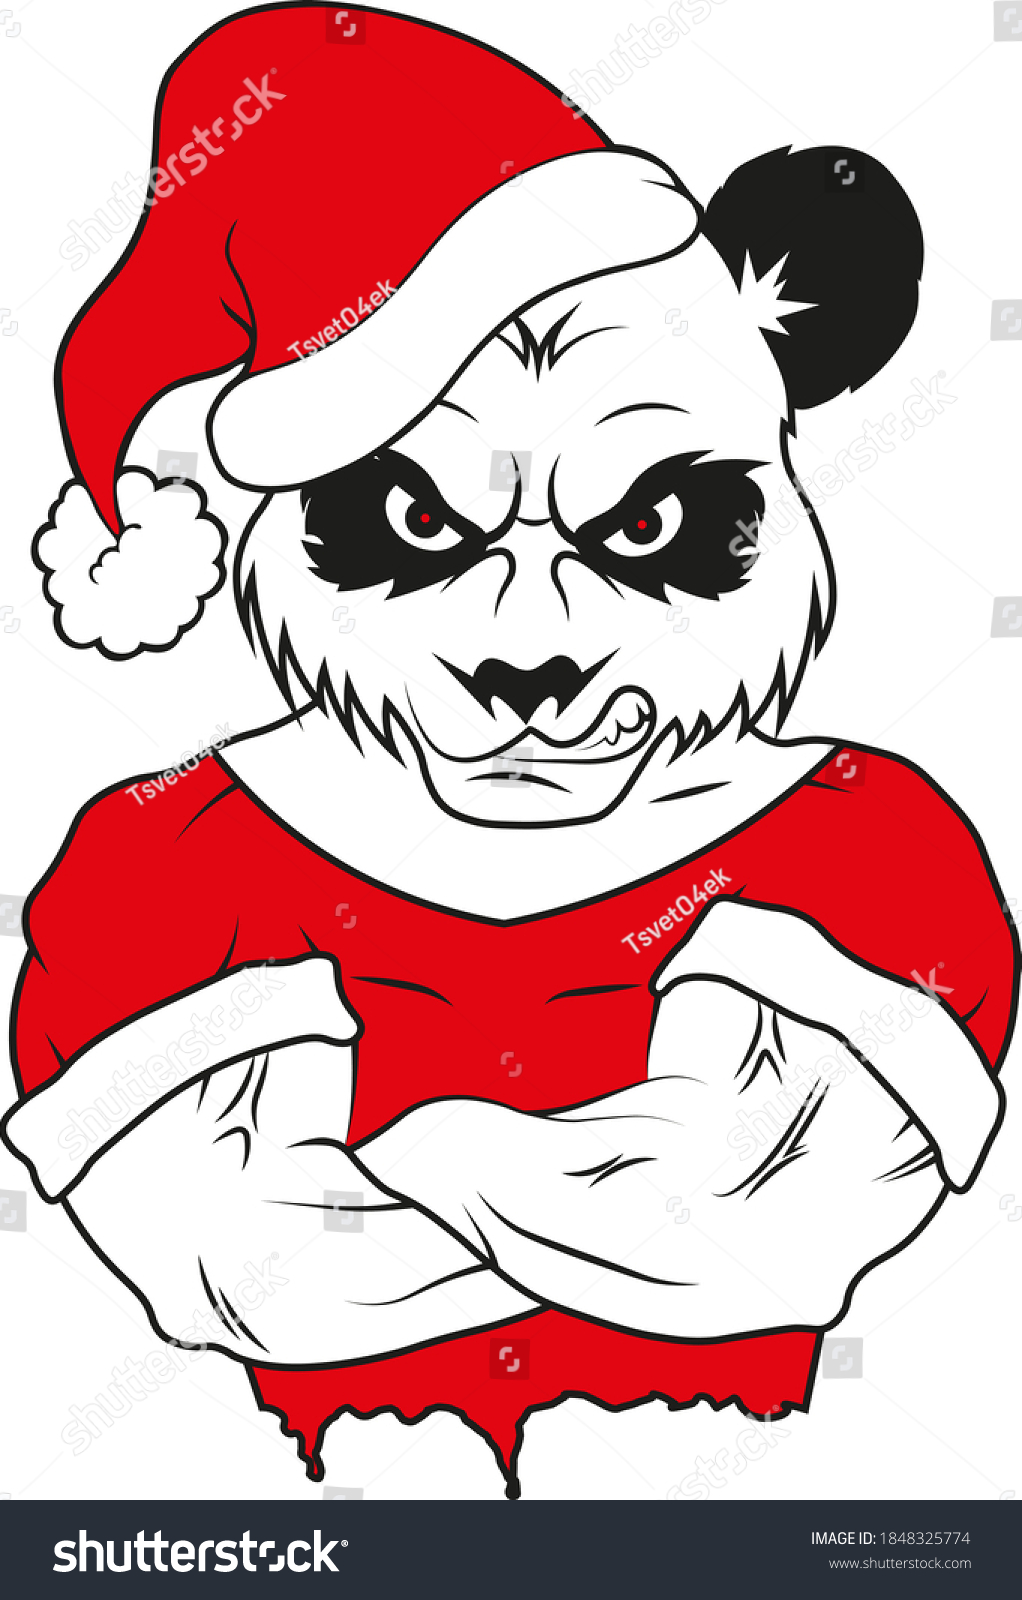 SVG of Angry panda bear santa claus wearing a christmas hat svg file for your design svg